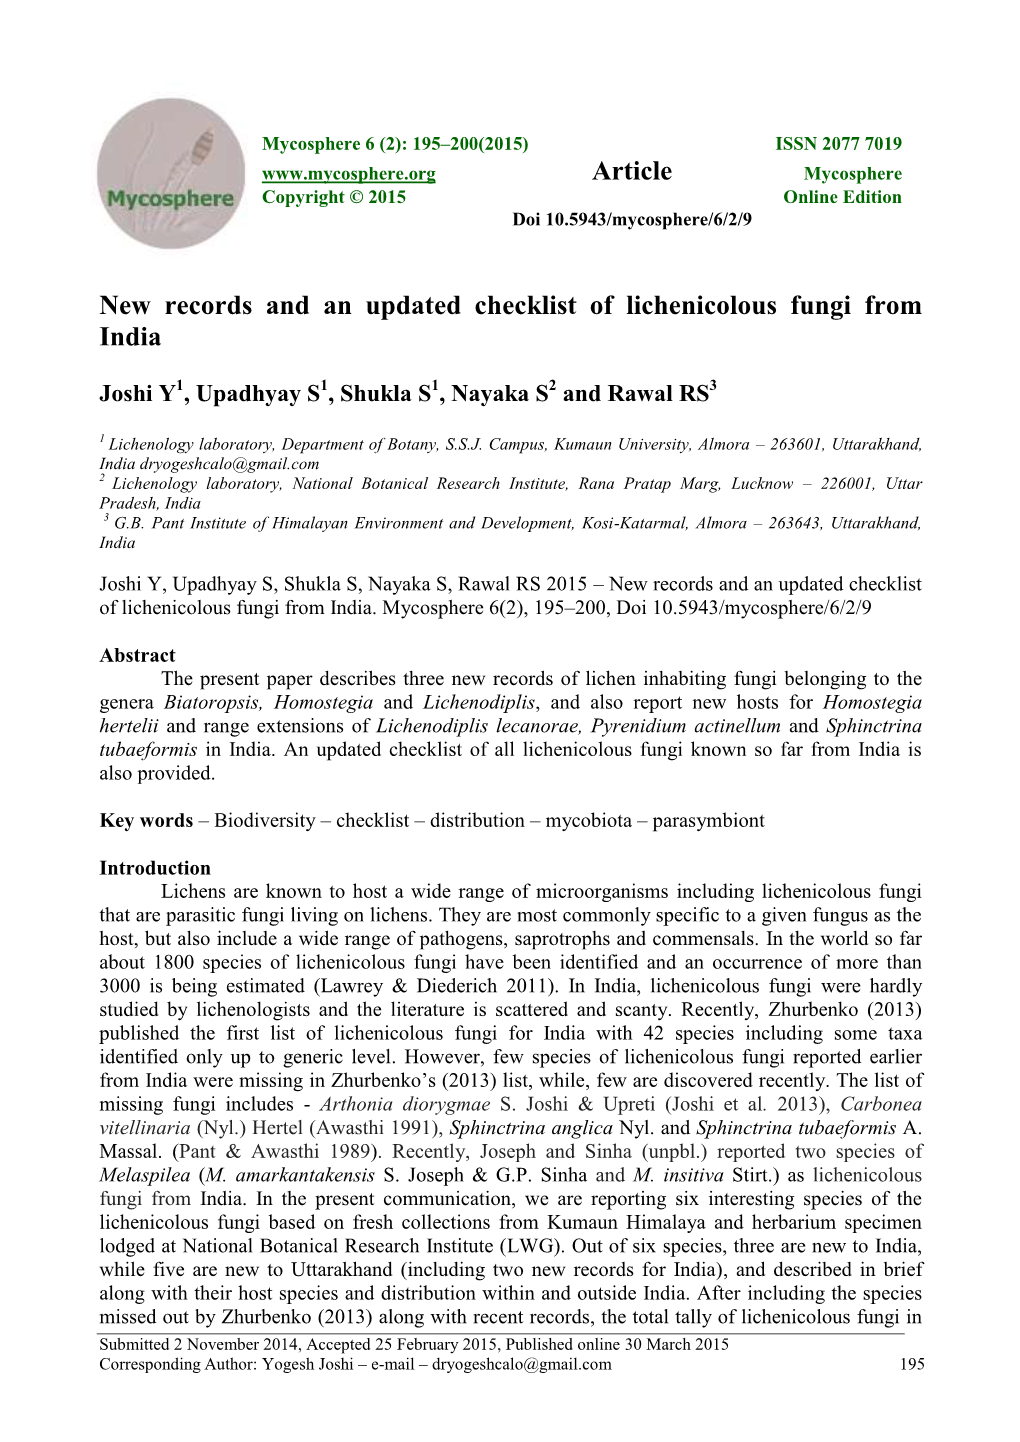 New Records and an Updated Checklist of Lichenicolous Fungi from India